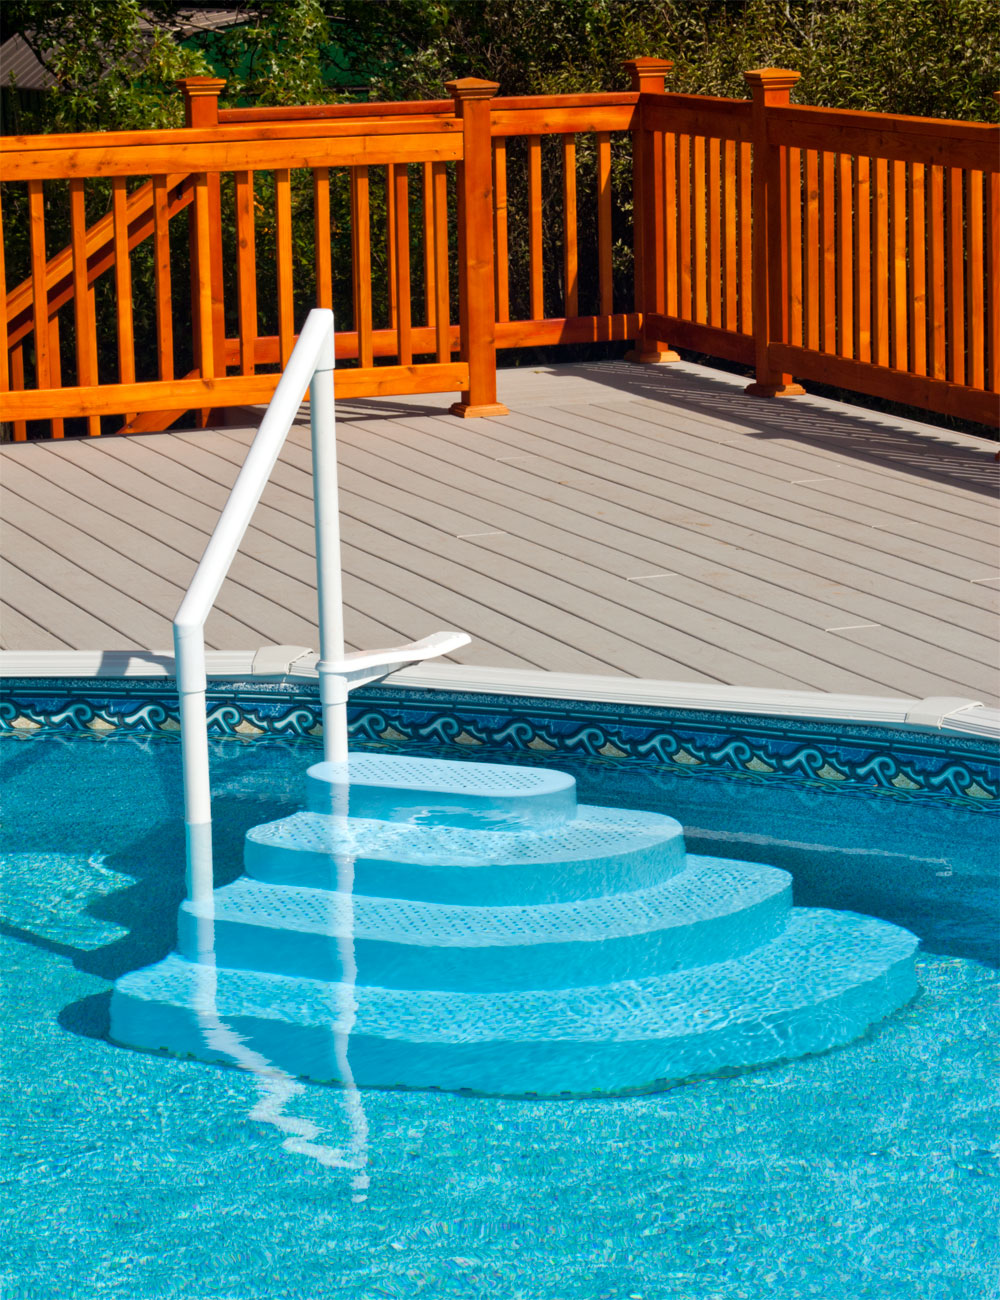 FINEST WEDDING CAKE ABOVE GROUND POOL STEP ENTRY w/ 4'x 5' Step Pad Handrail New, Decorate With